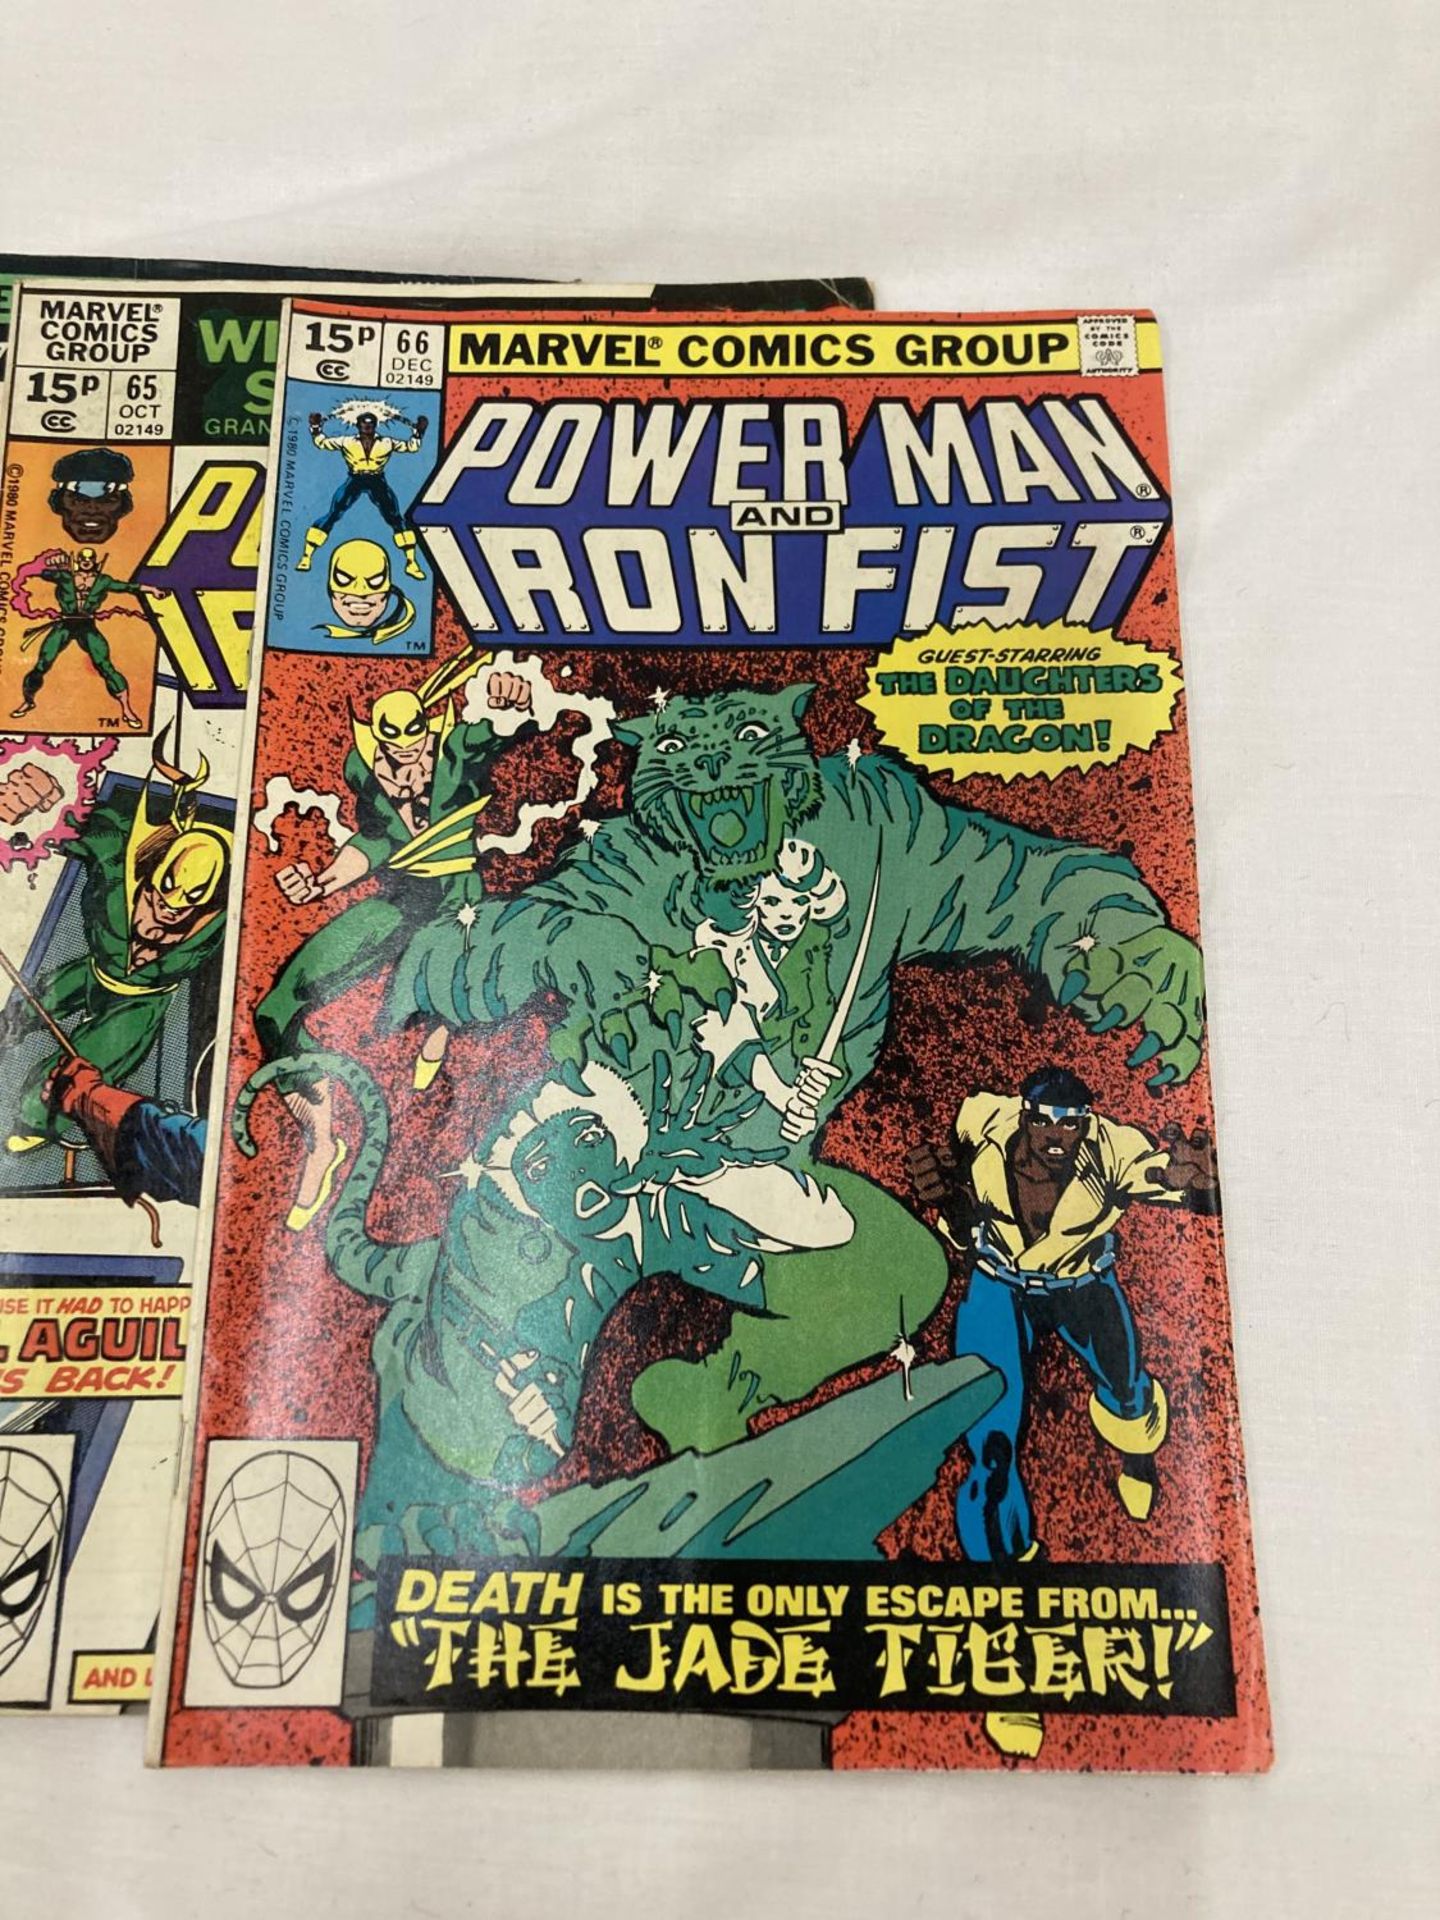 FIVE VINTAGE MARVEL POWERMAN AND IRON FISH COMICS FROM THE 1970'S - Image 7 of 14